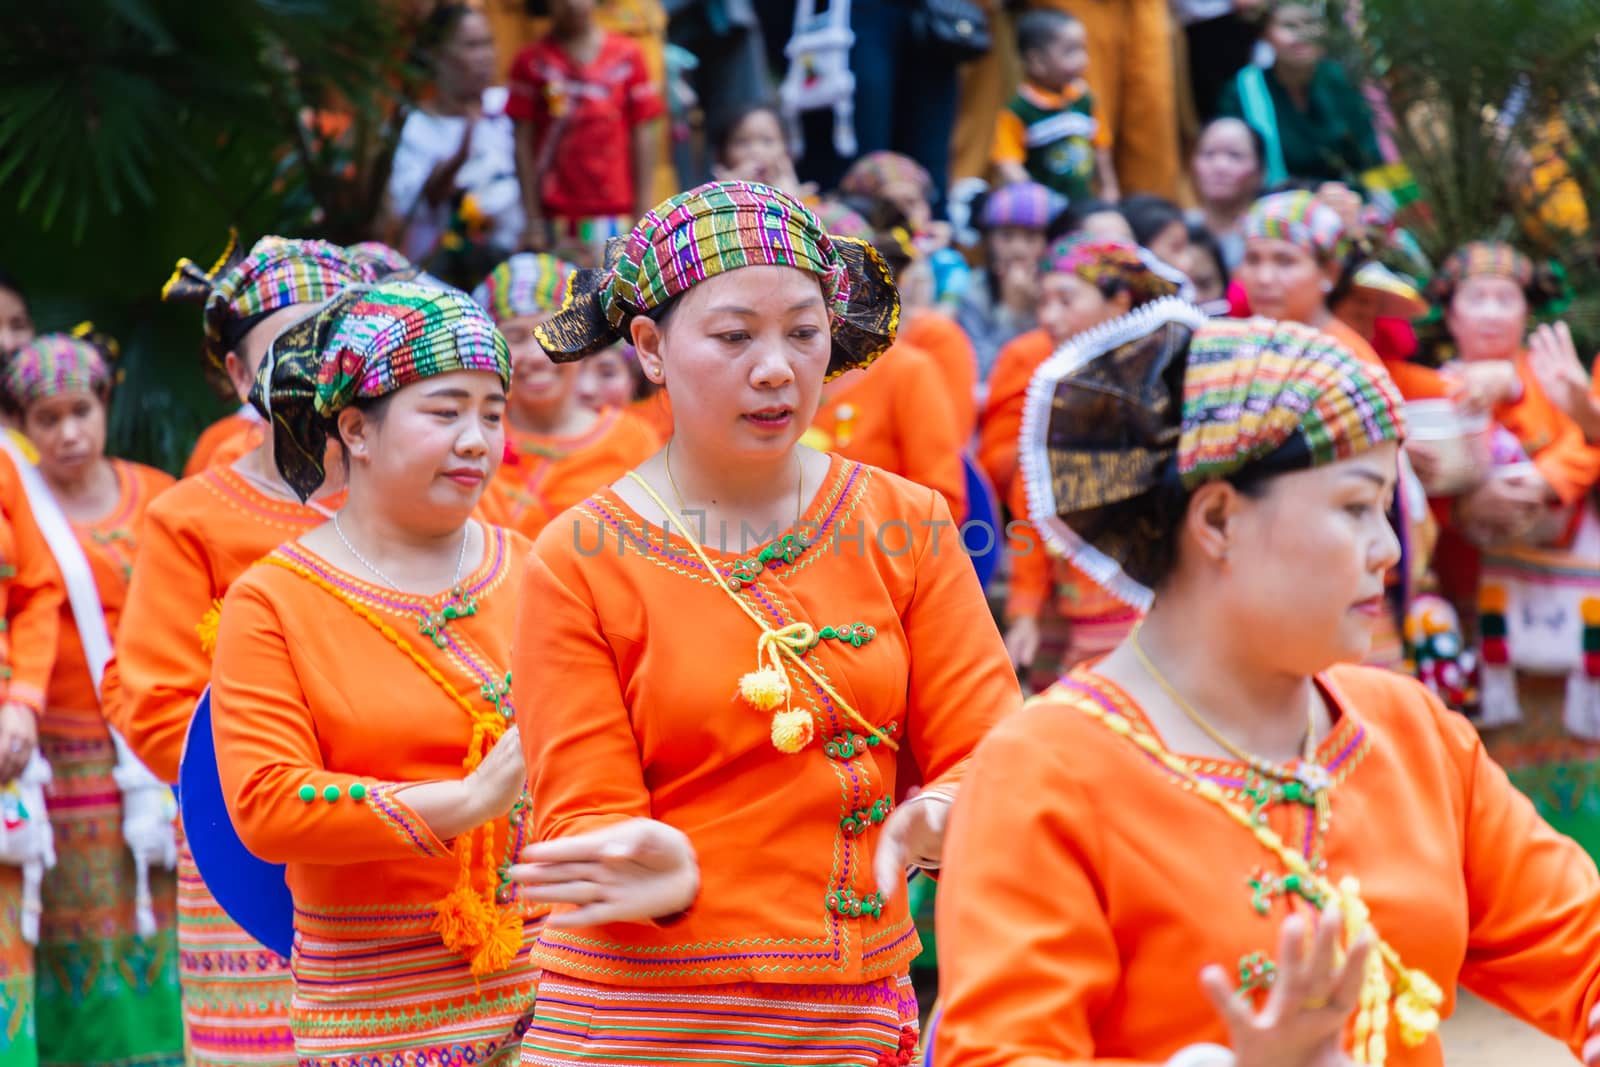 Thoet Thai, Chiang Rai - THAILAND, December 12, 2018 : Group of Shan or Tai Yai (ethnic group living in parts of Myanmar and Thailand) in tribal dress do native dancing in Shan New Year celebrations.